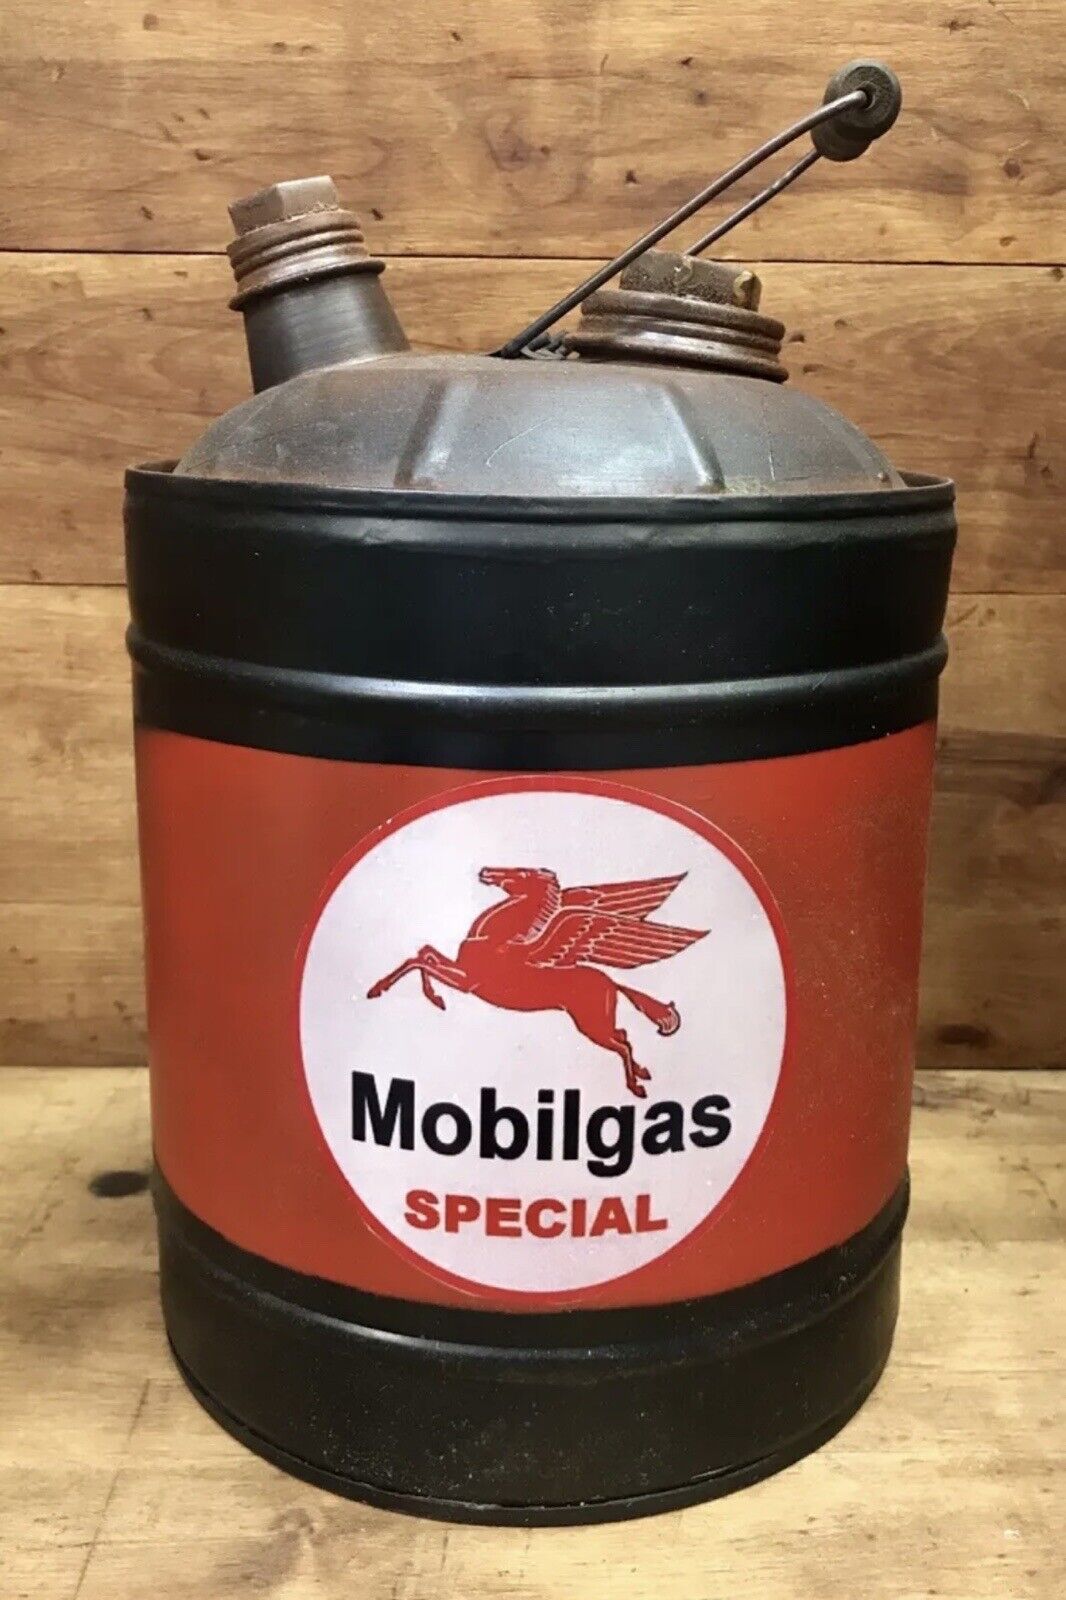 MOBILGAS Special 5 Gallon Metal Gas Filler Can with Spout, Handle